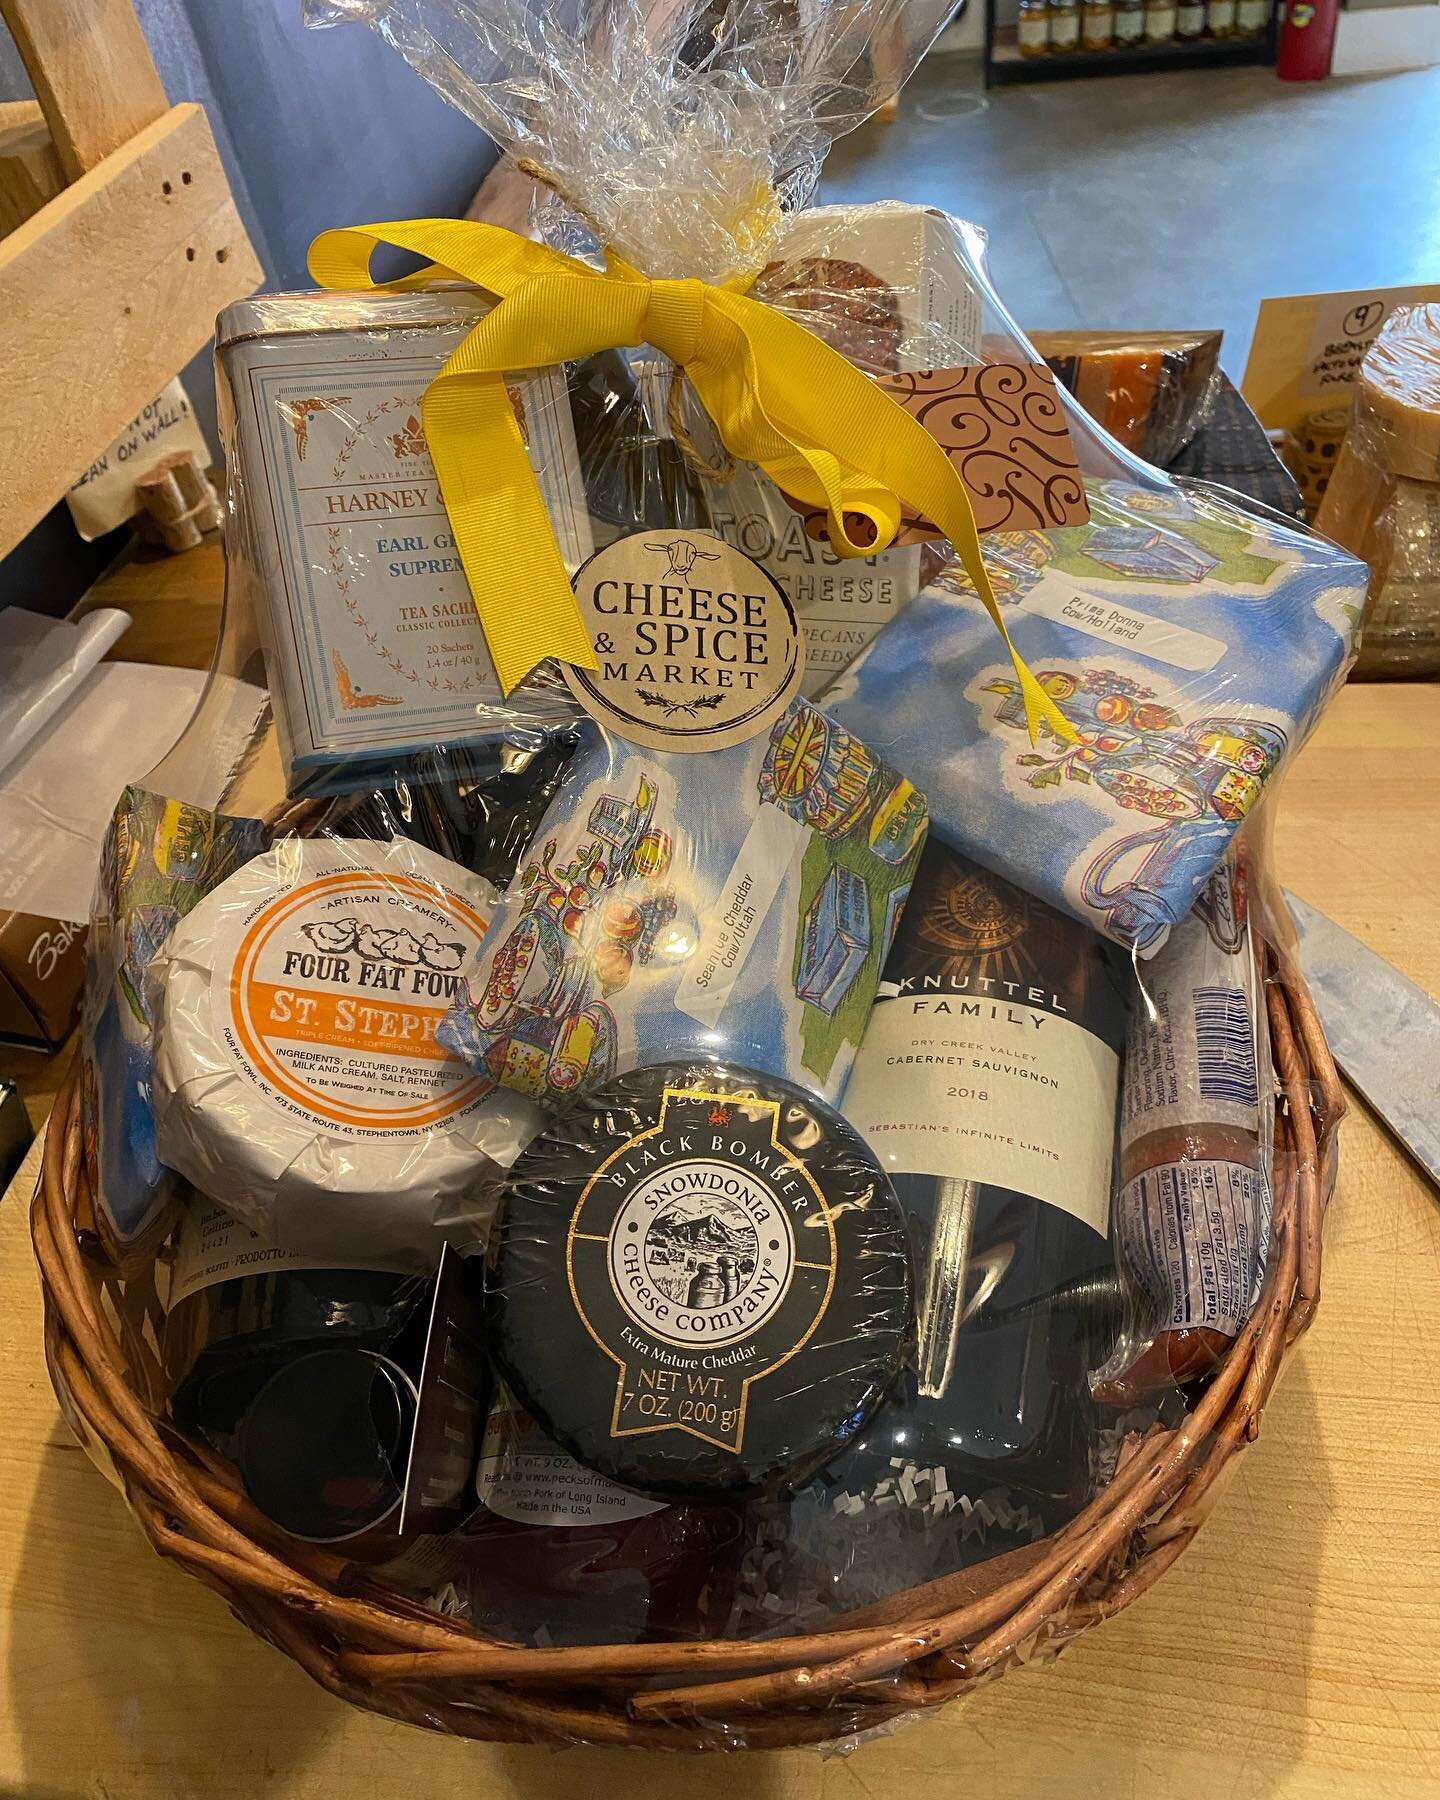 Yes we can make you a gift basket! We also deliver if needed. Want to add wine? Call Wines by Nature order there and then we can add it to your cheese basket. So many items to choose from. Give us a price point and we&rsquo;ll do the rest! #cheese #g